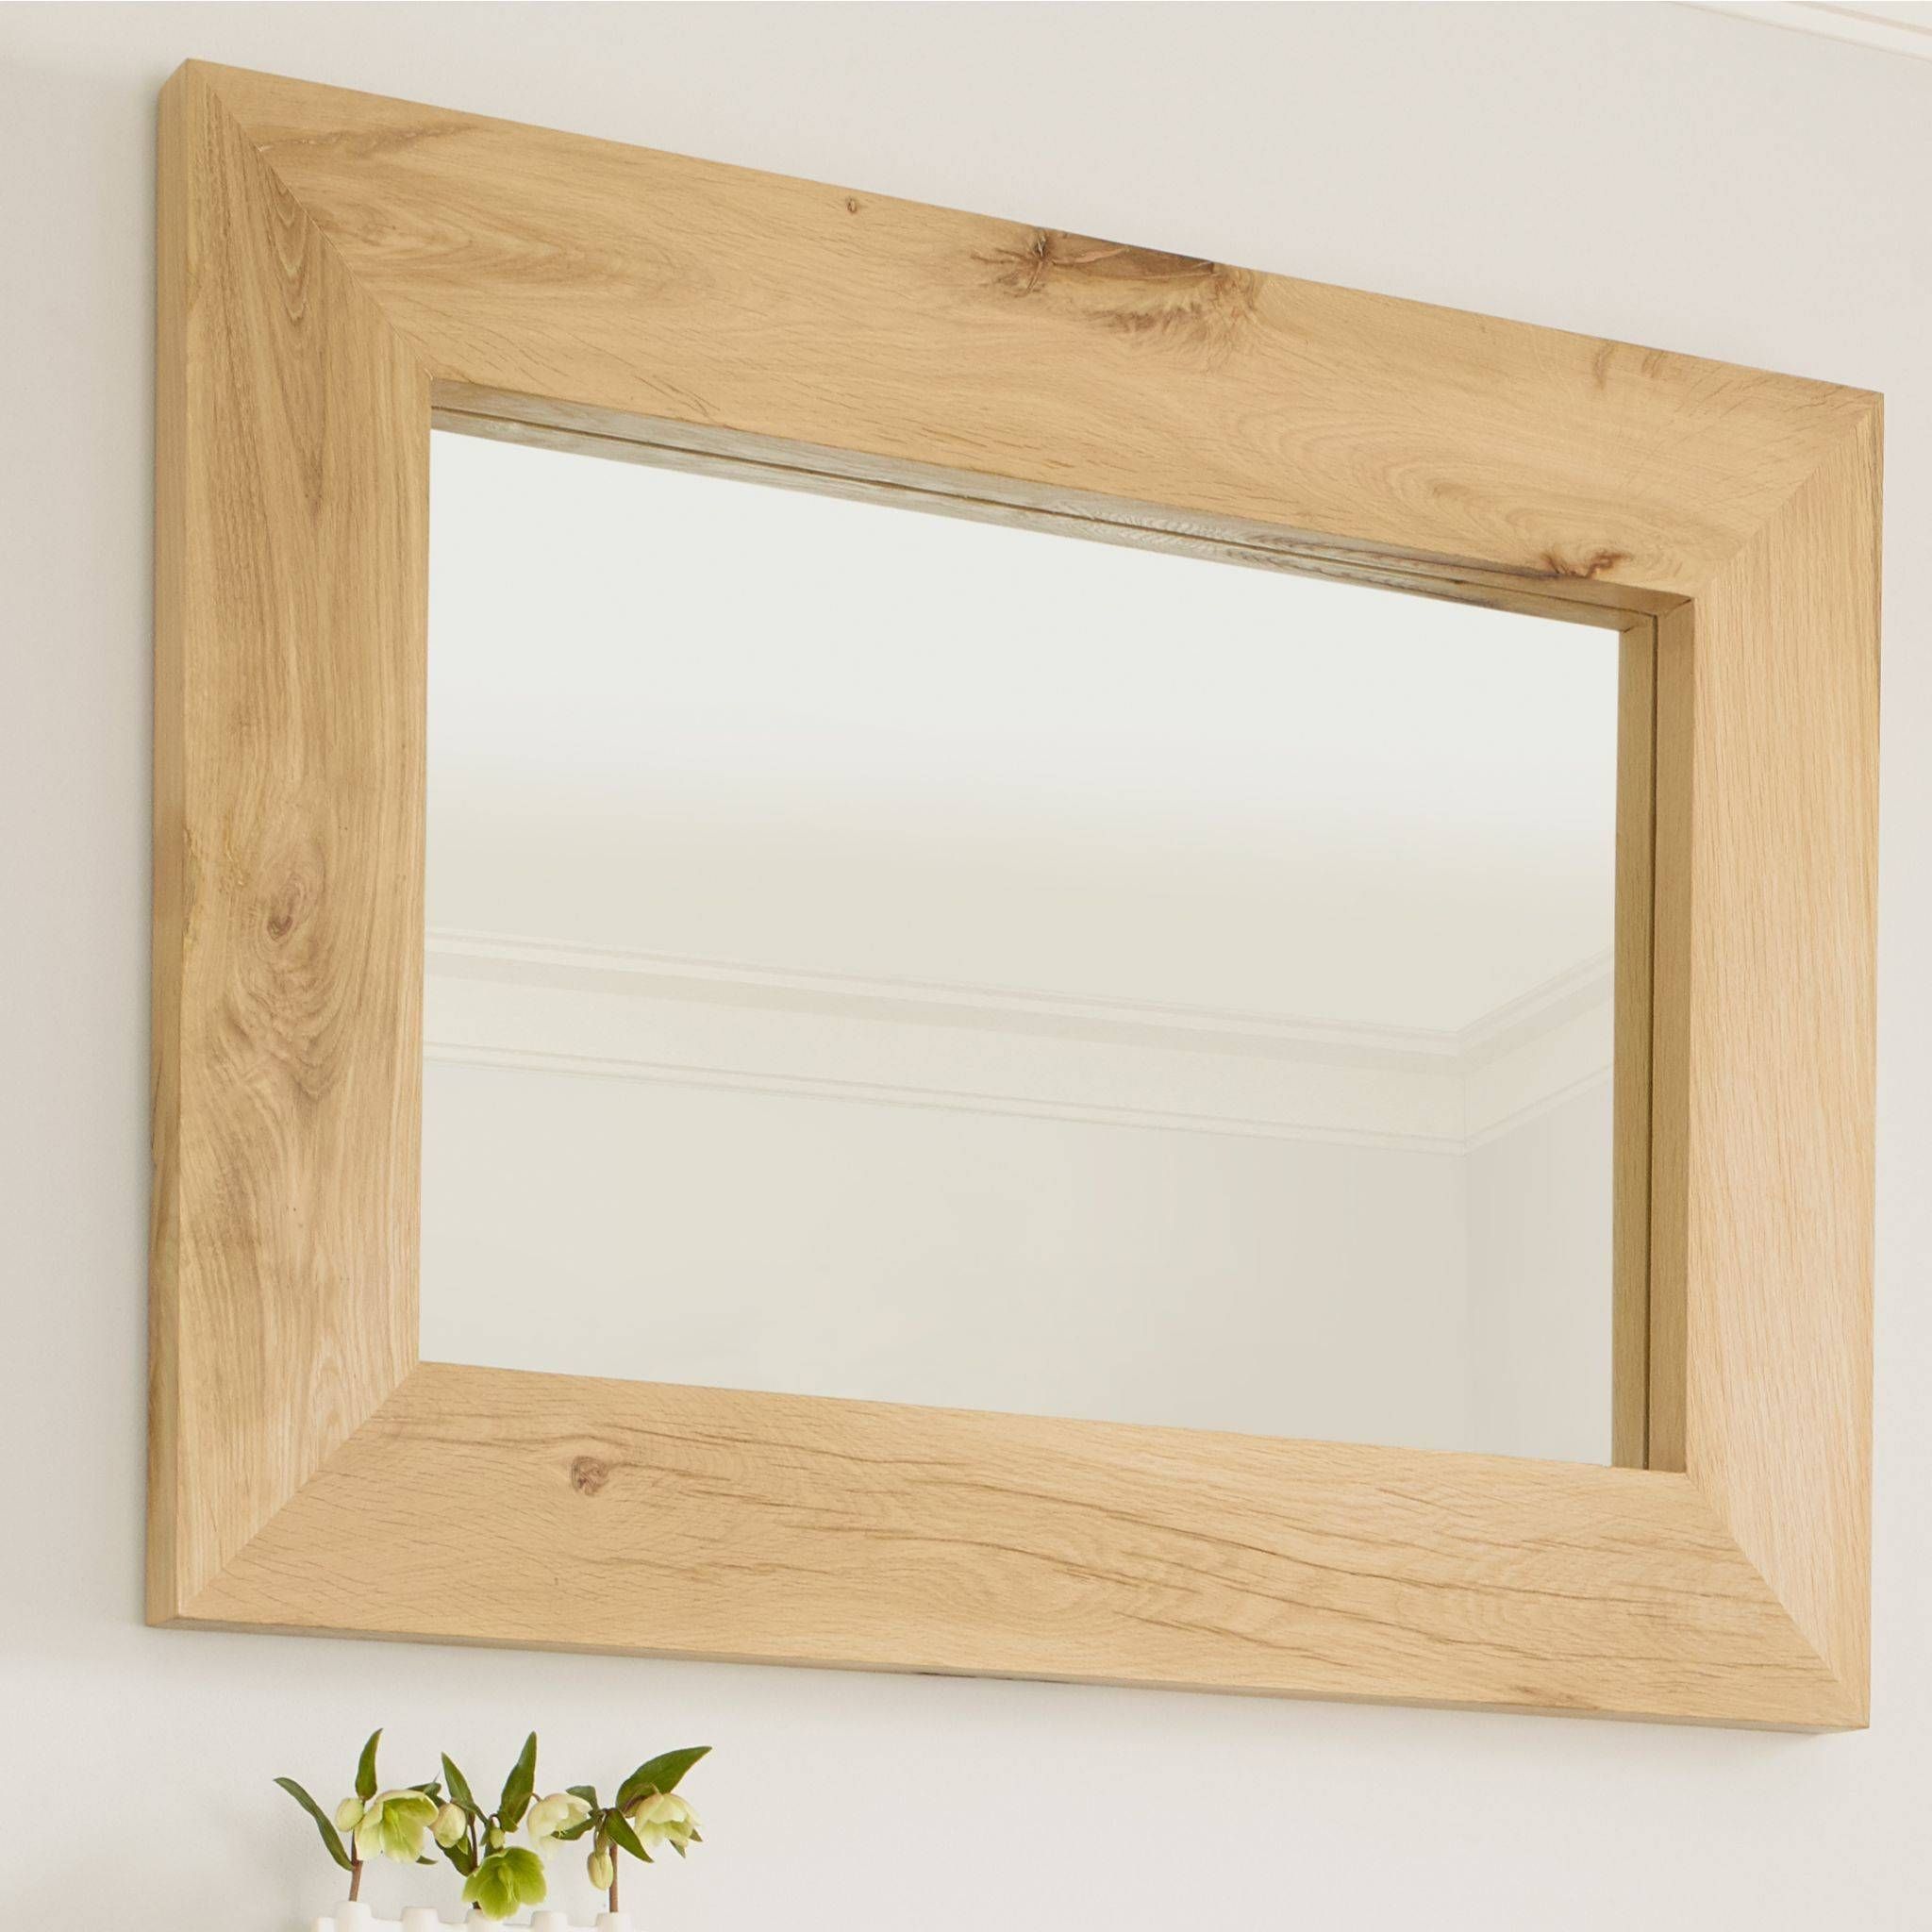 Oak Mirrors Intended For Oak Mirrors (View 4 of 15)